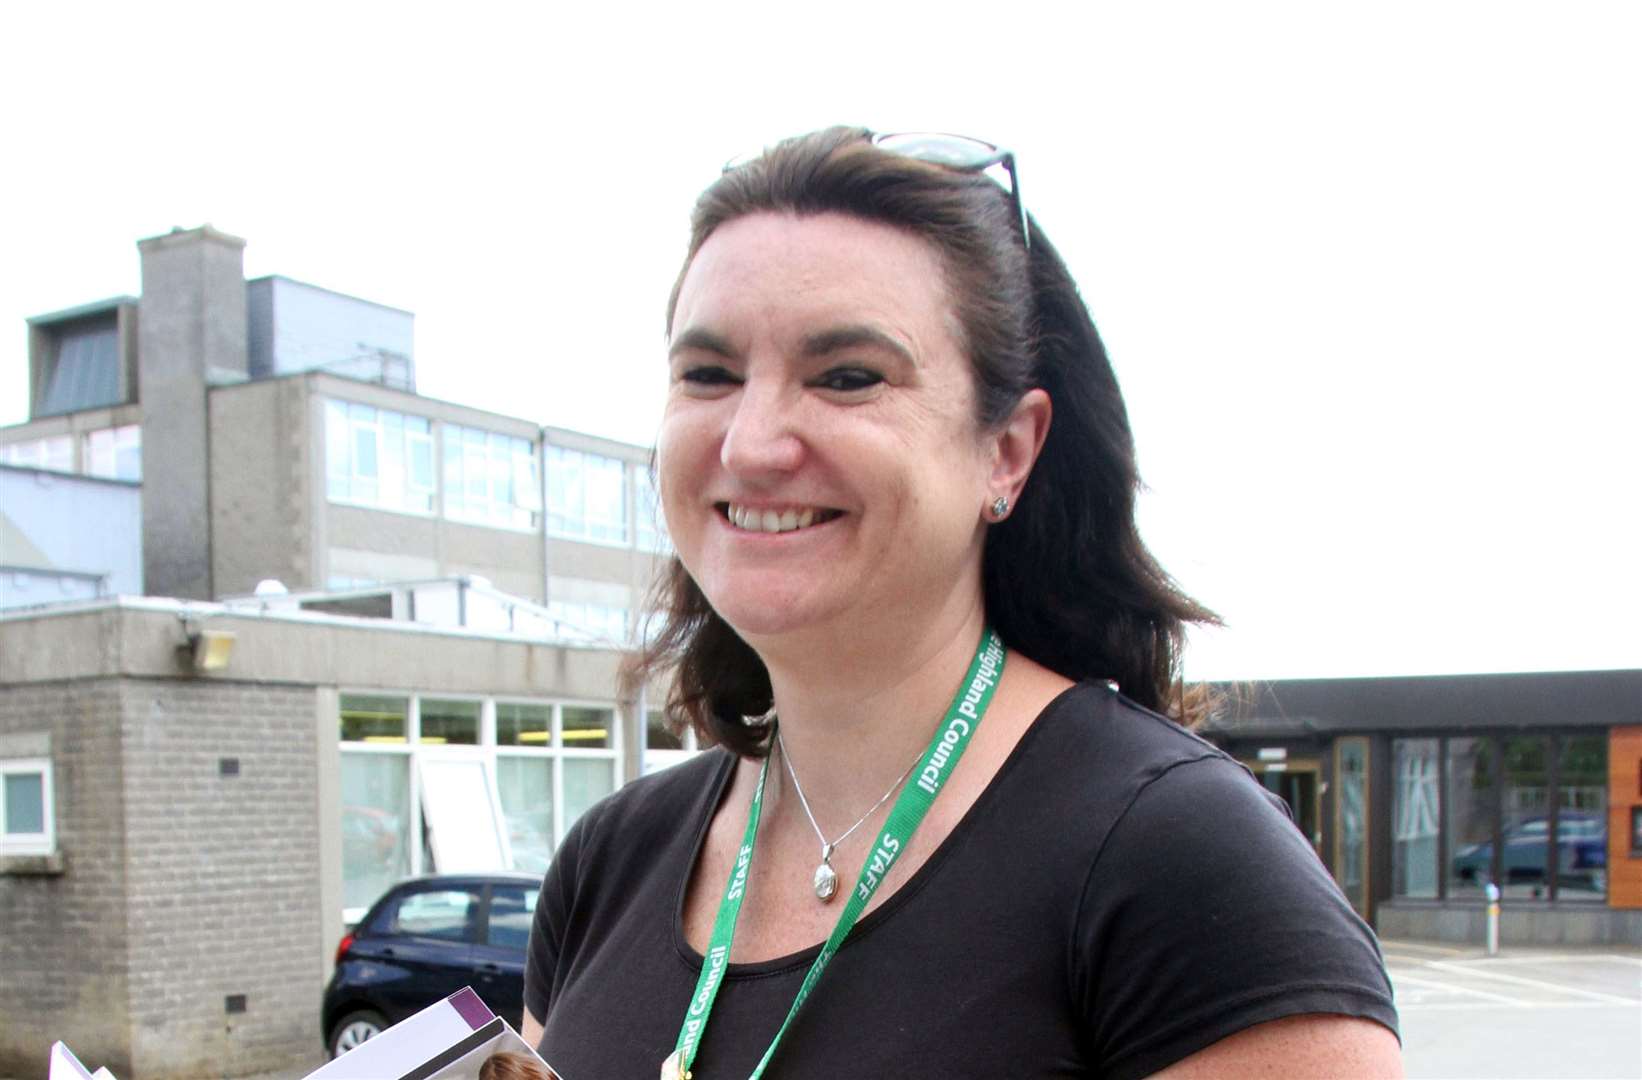 Headteacher Claire McGonigal is delighted school has been able to assist older pupils to get the Covid vaccination.